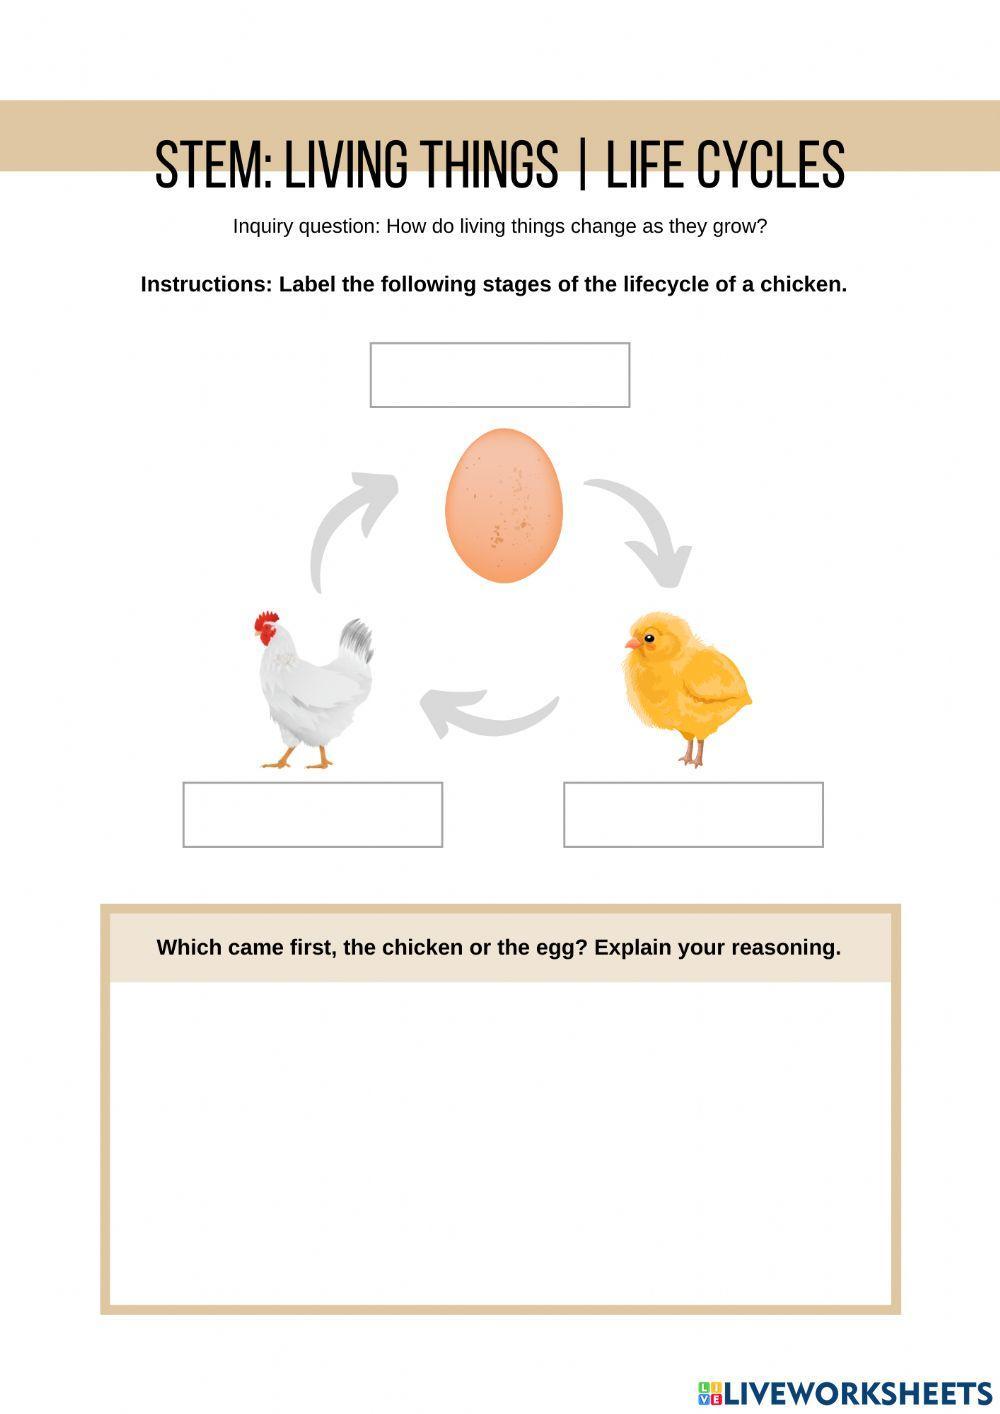 STEM: Living Things - Life cycles chicken